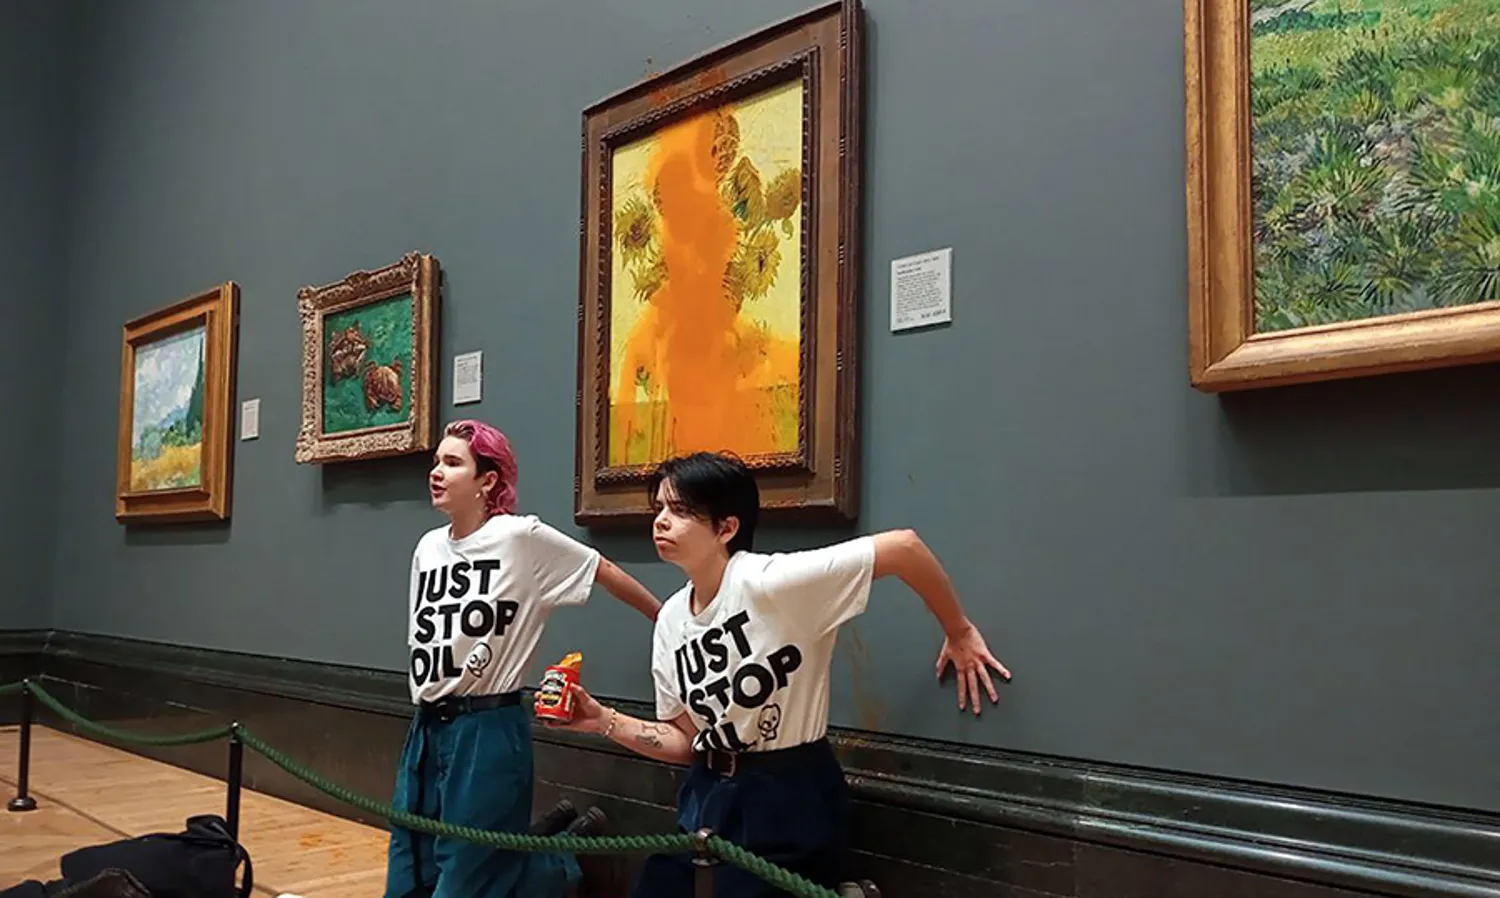 Activists from Just Stop Oil climate campaign group threw tomato soup on Vincent van Gogh's "Sunflowers" and glued their hands to the wall beneath the painting at the National Gallery in London on Oct. 14. They were arrested and charged with criminal damage and aggravated trespass. HANDOUT PHOTO, JUST STOP OIL/AFP VIA GETTY IMAGES